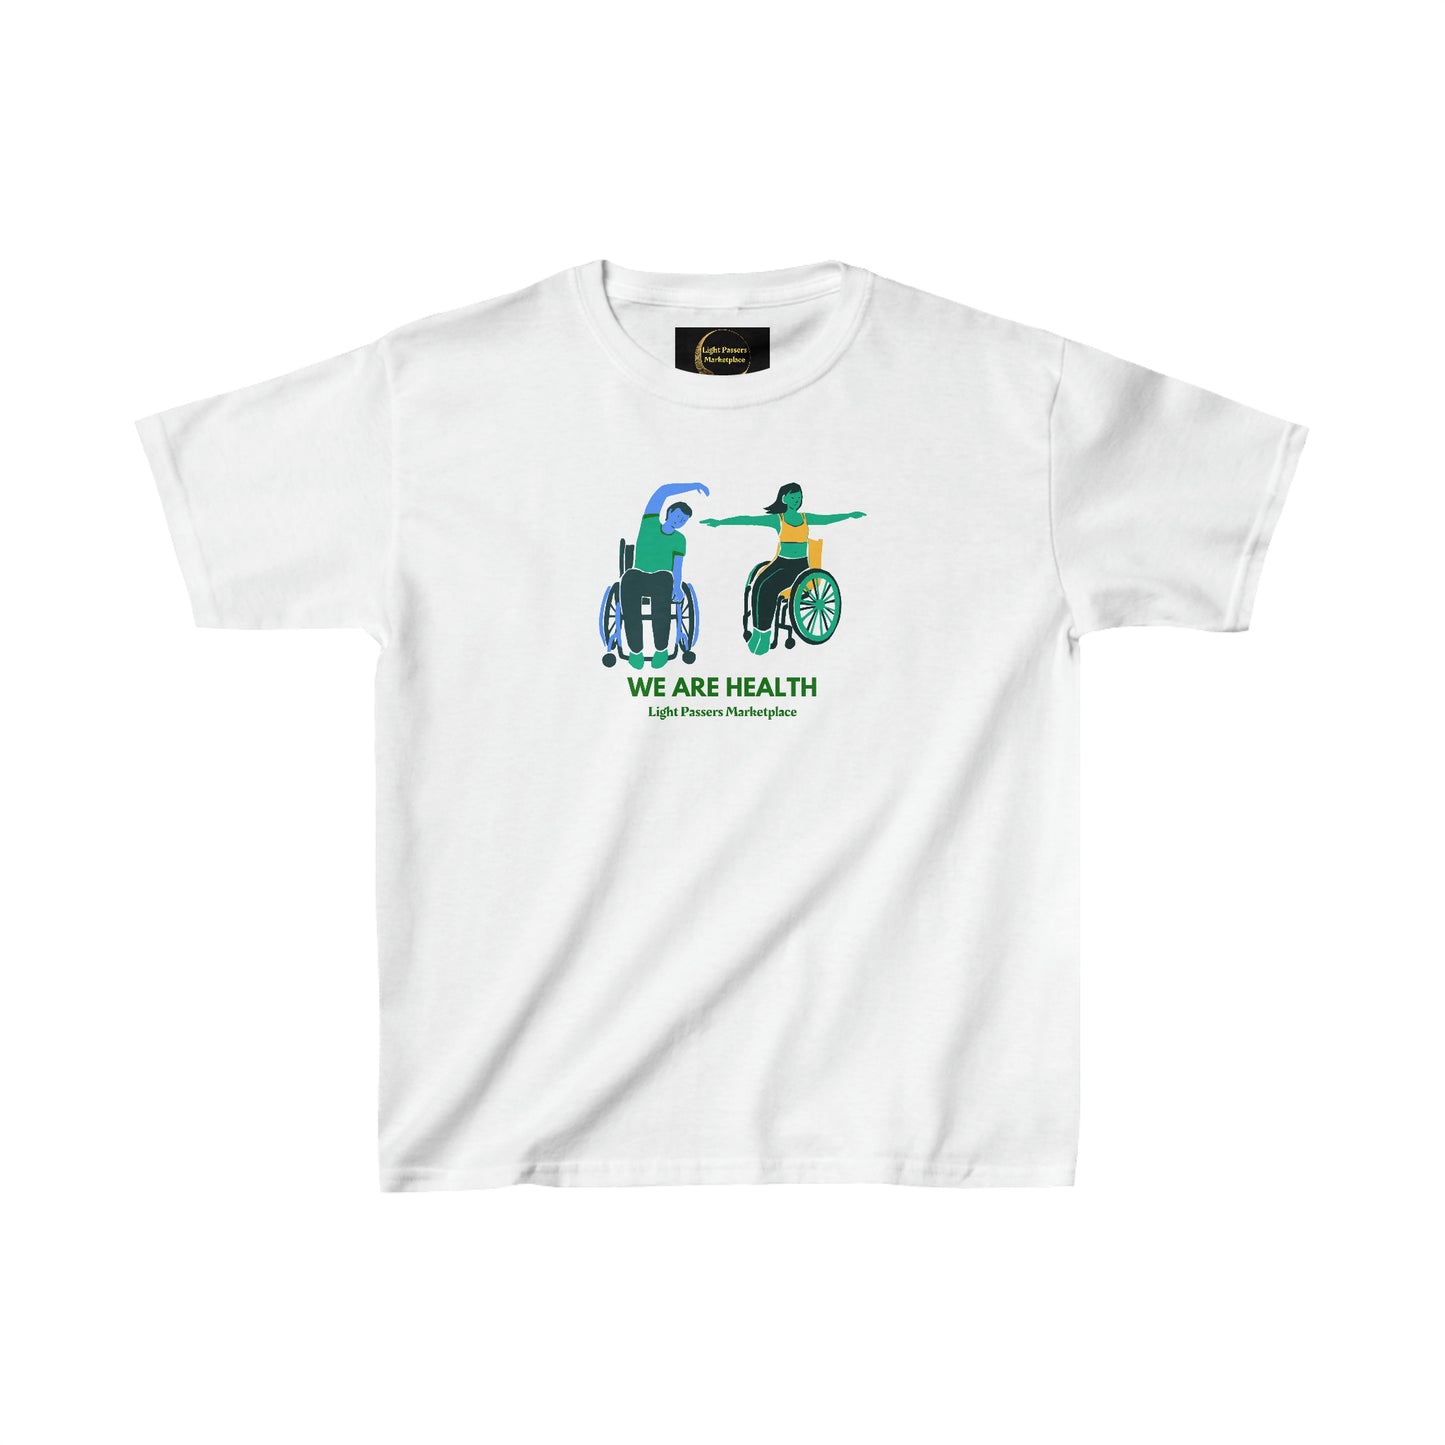 Light Passers Marketplace Wheelchair Yoga Youth Cotton™ T-shirt Fitness, Diversity, Mental Health